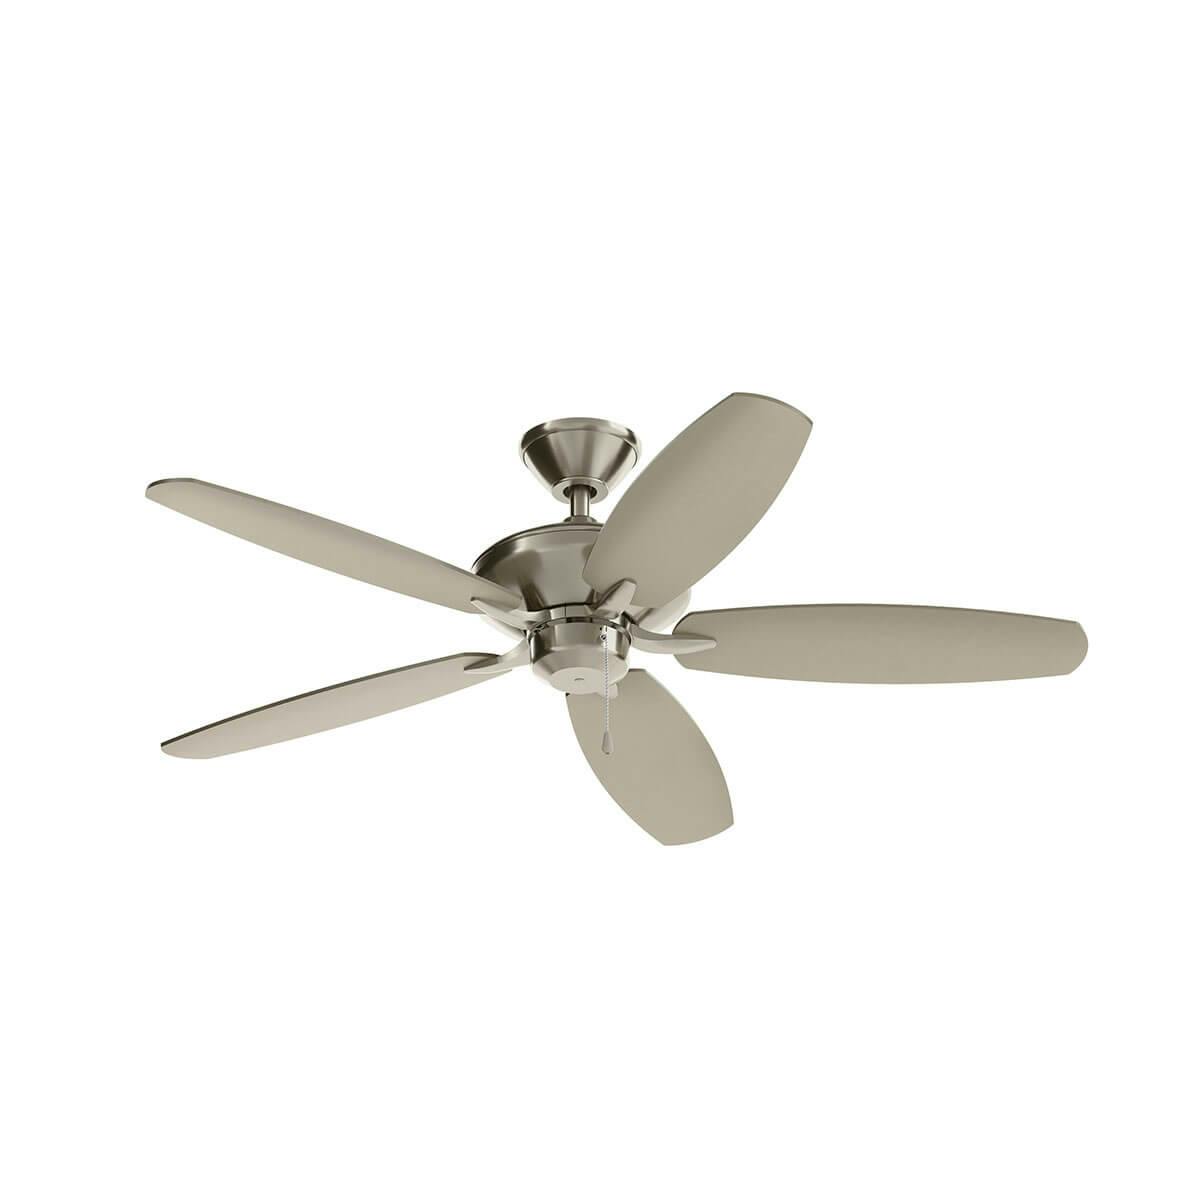 Product Image of ceiling fan 330164BSS